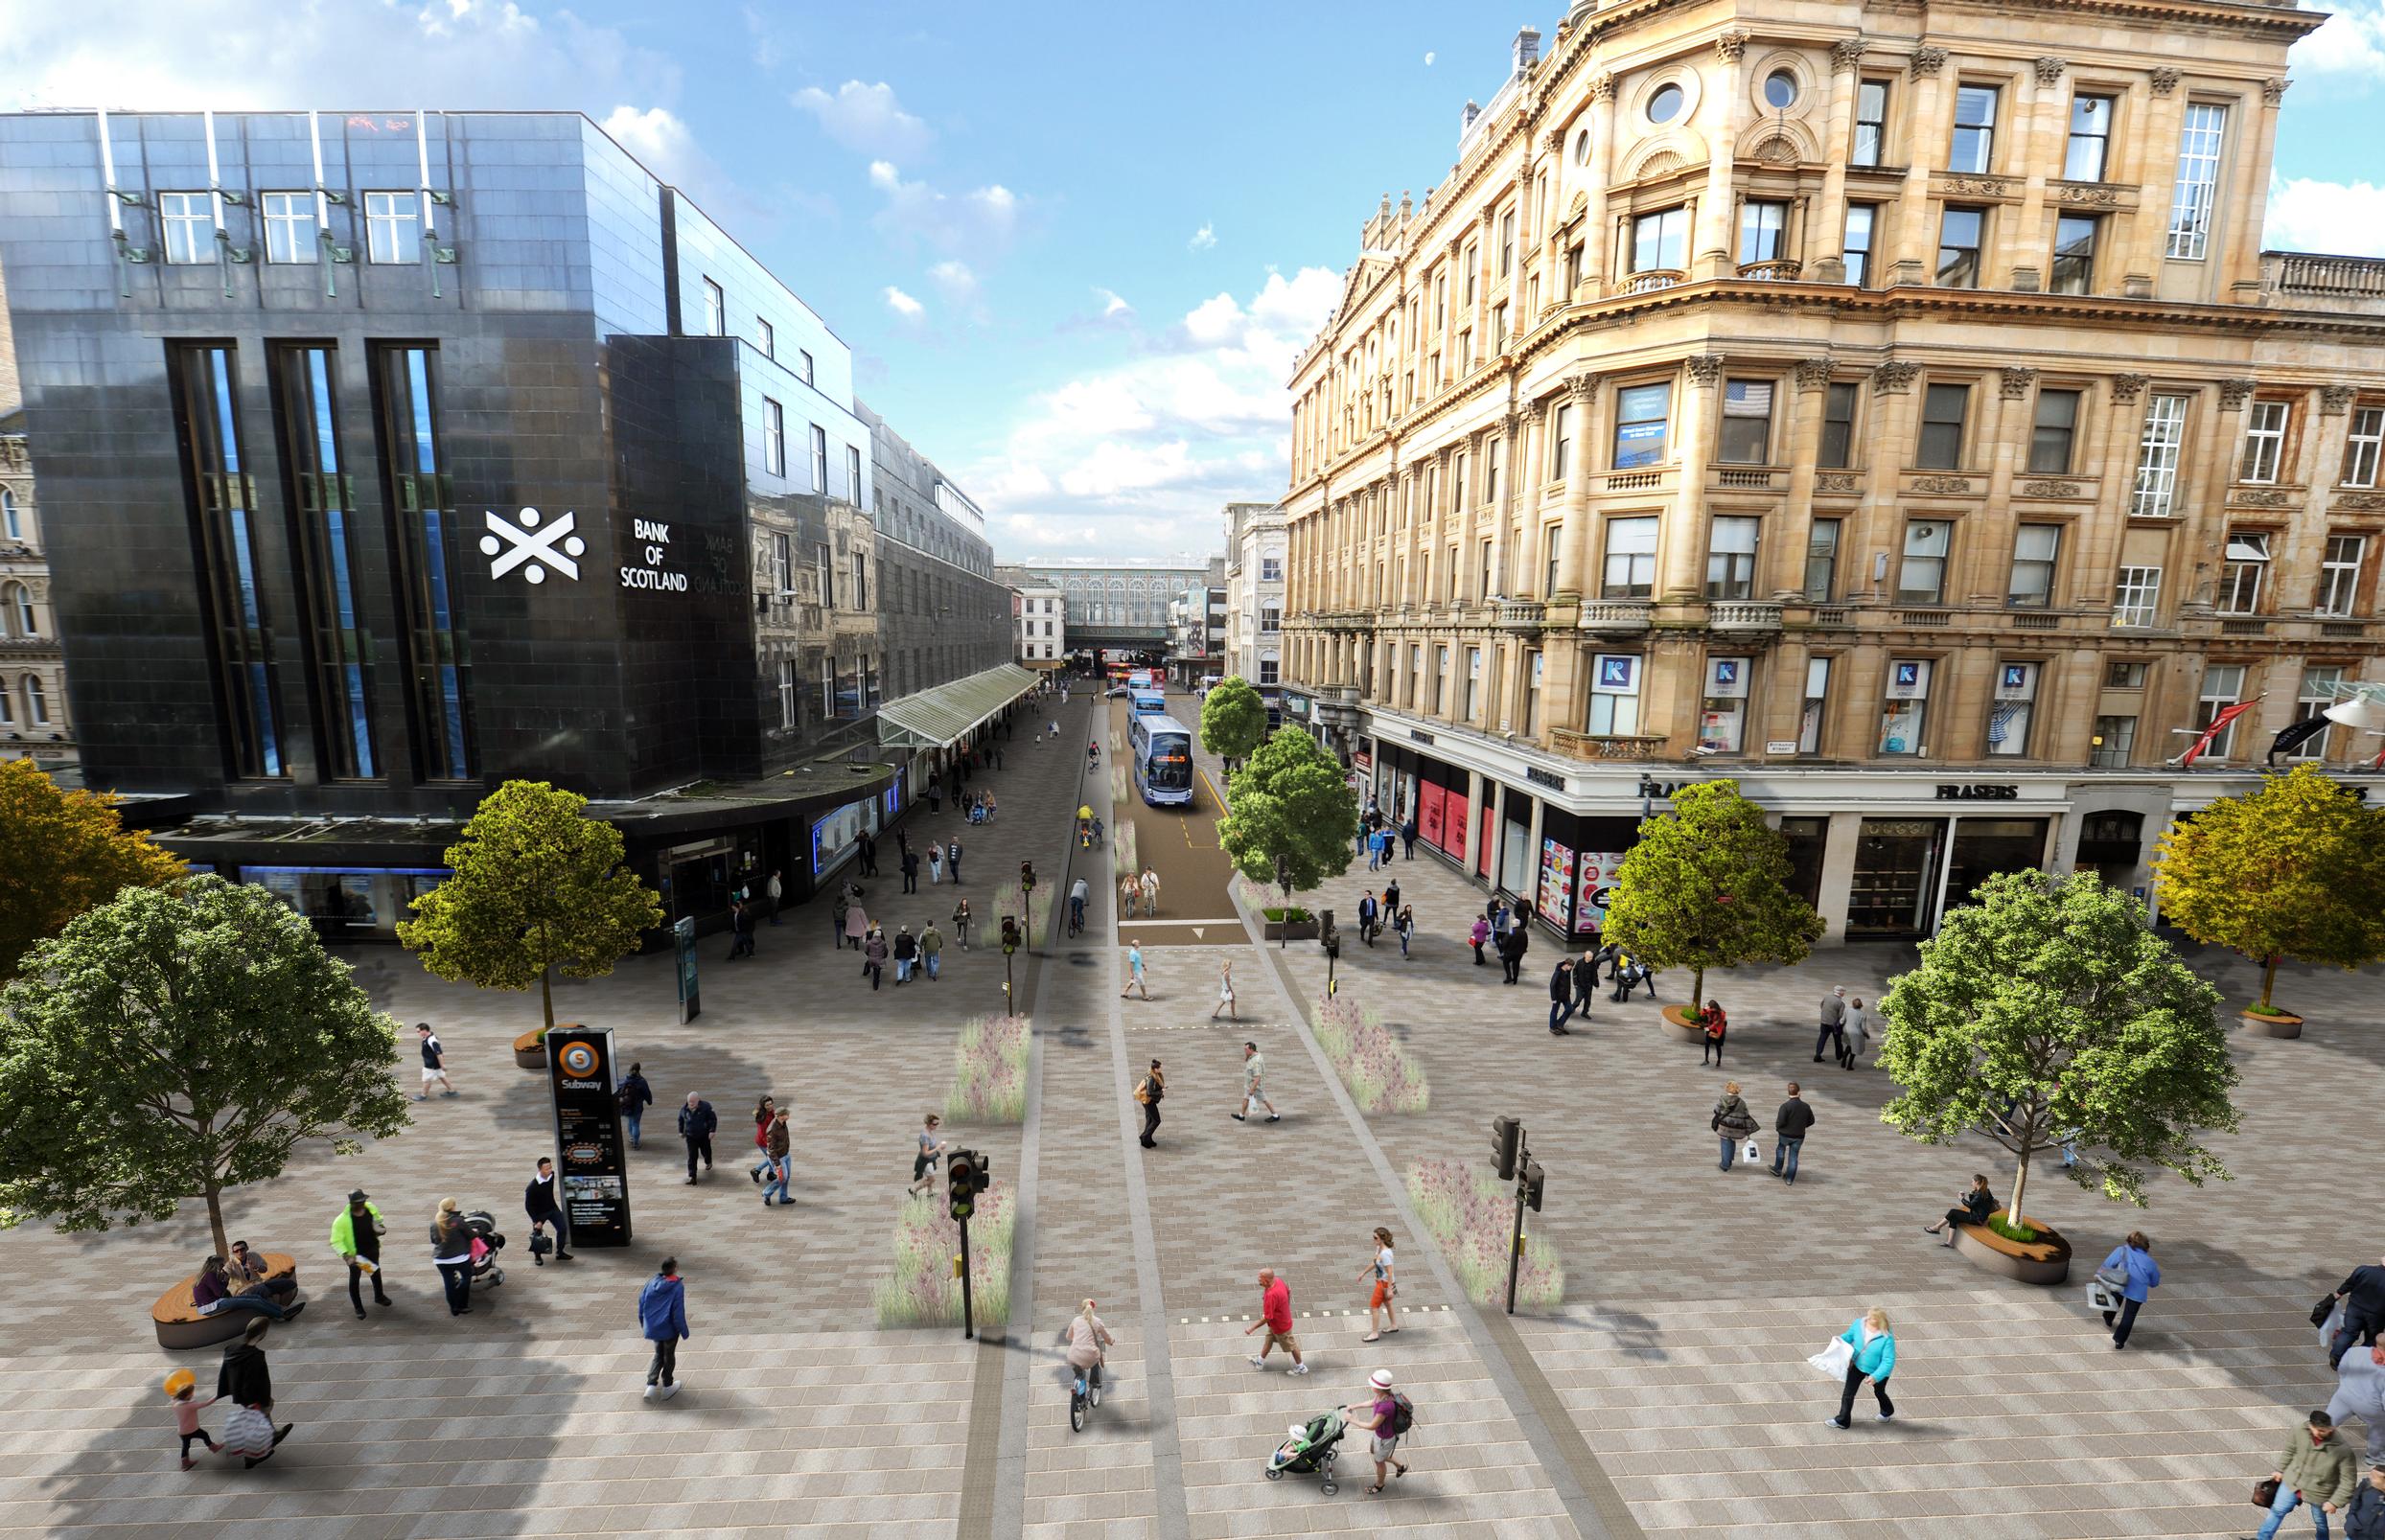 Glasgow`s draft transport strategy also aims to tackle poverty, support economic growth and create more liveable neighbourhoods by boosting public and active modes of transport